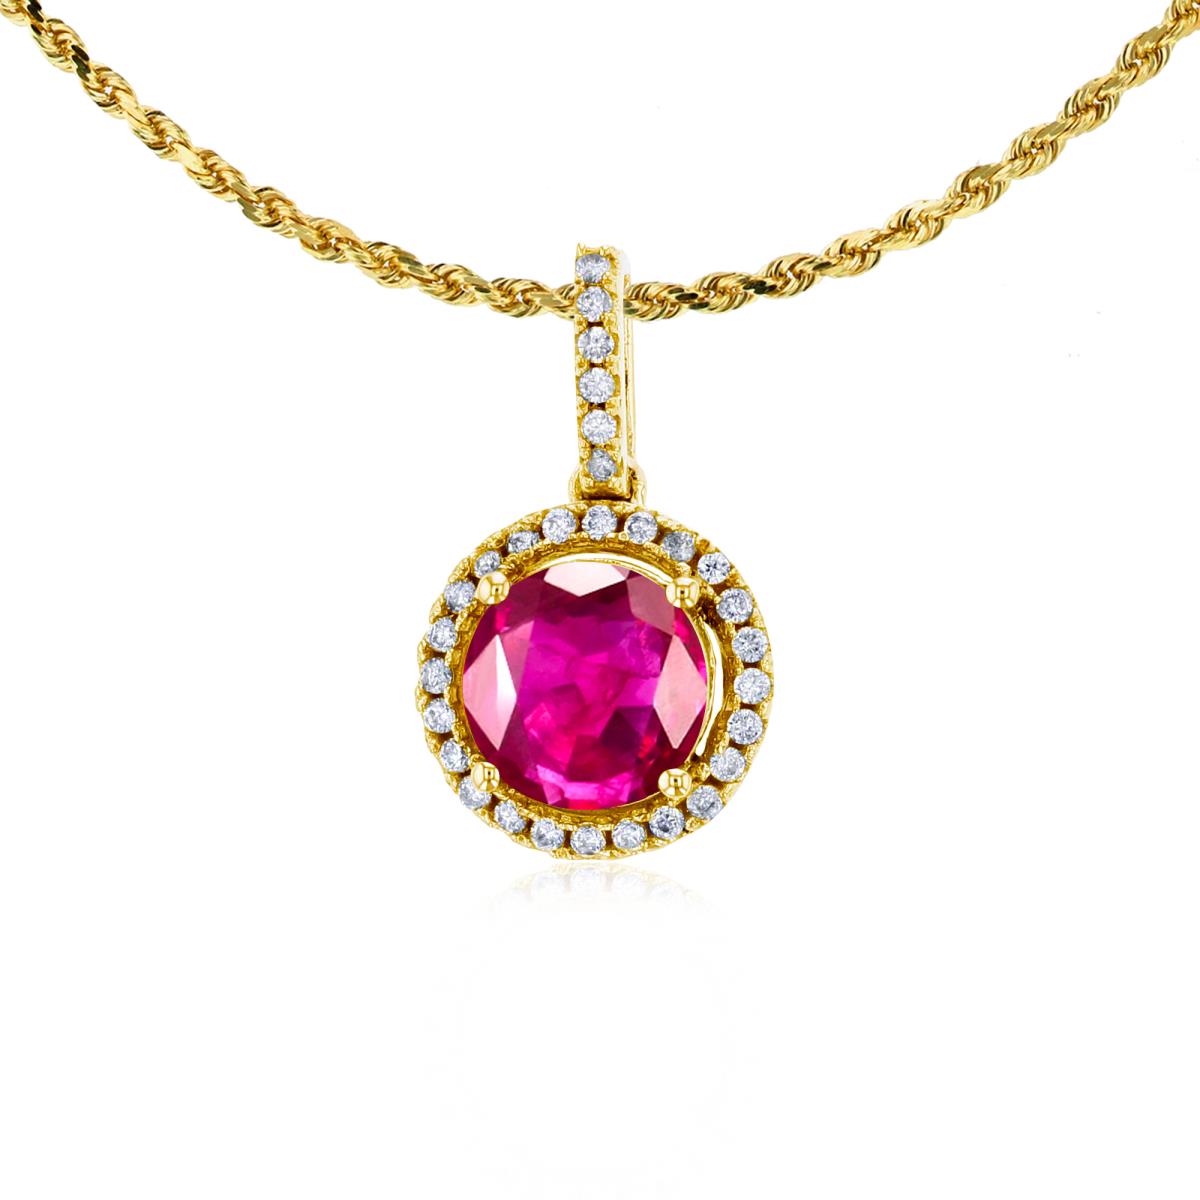 10K Yellow Gold 7mm Round Glass Filled Ruby & 0.15 CTTW Round Diamonds Halo 18" Rope Chain Necklace